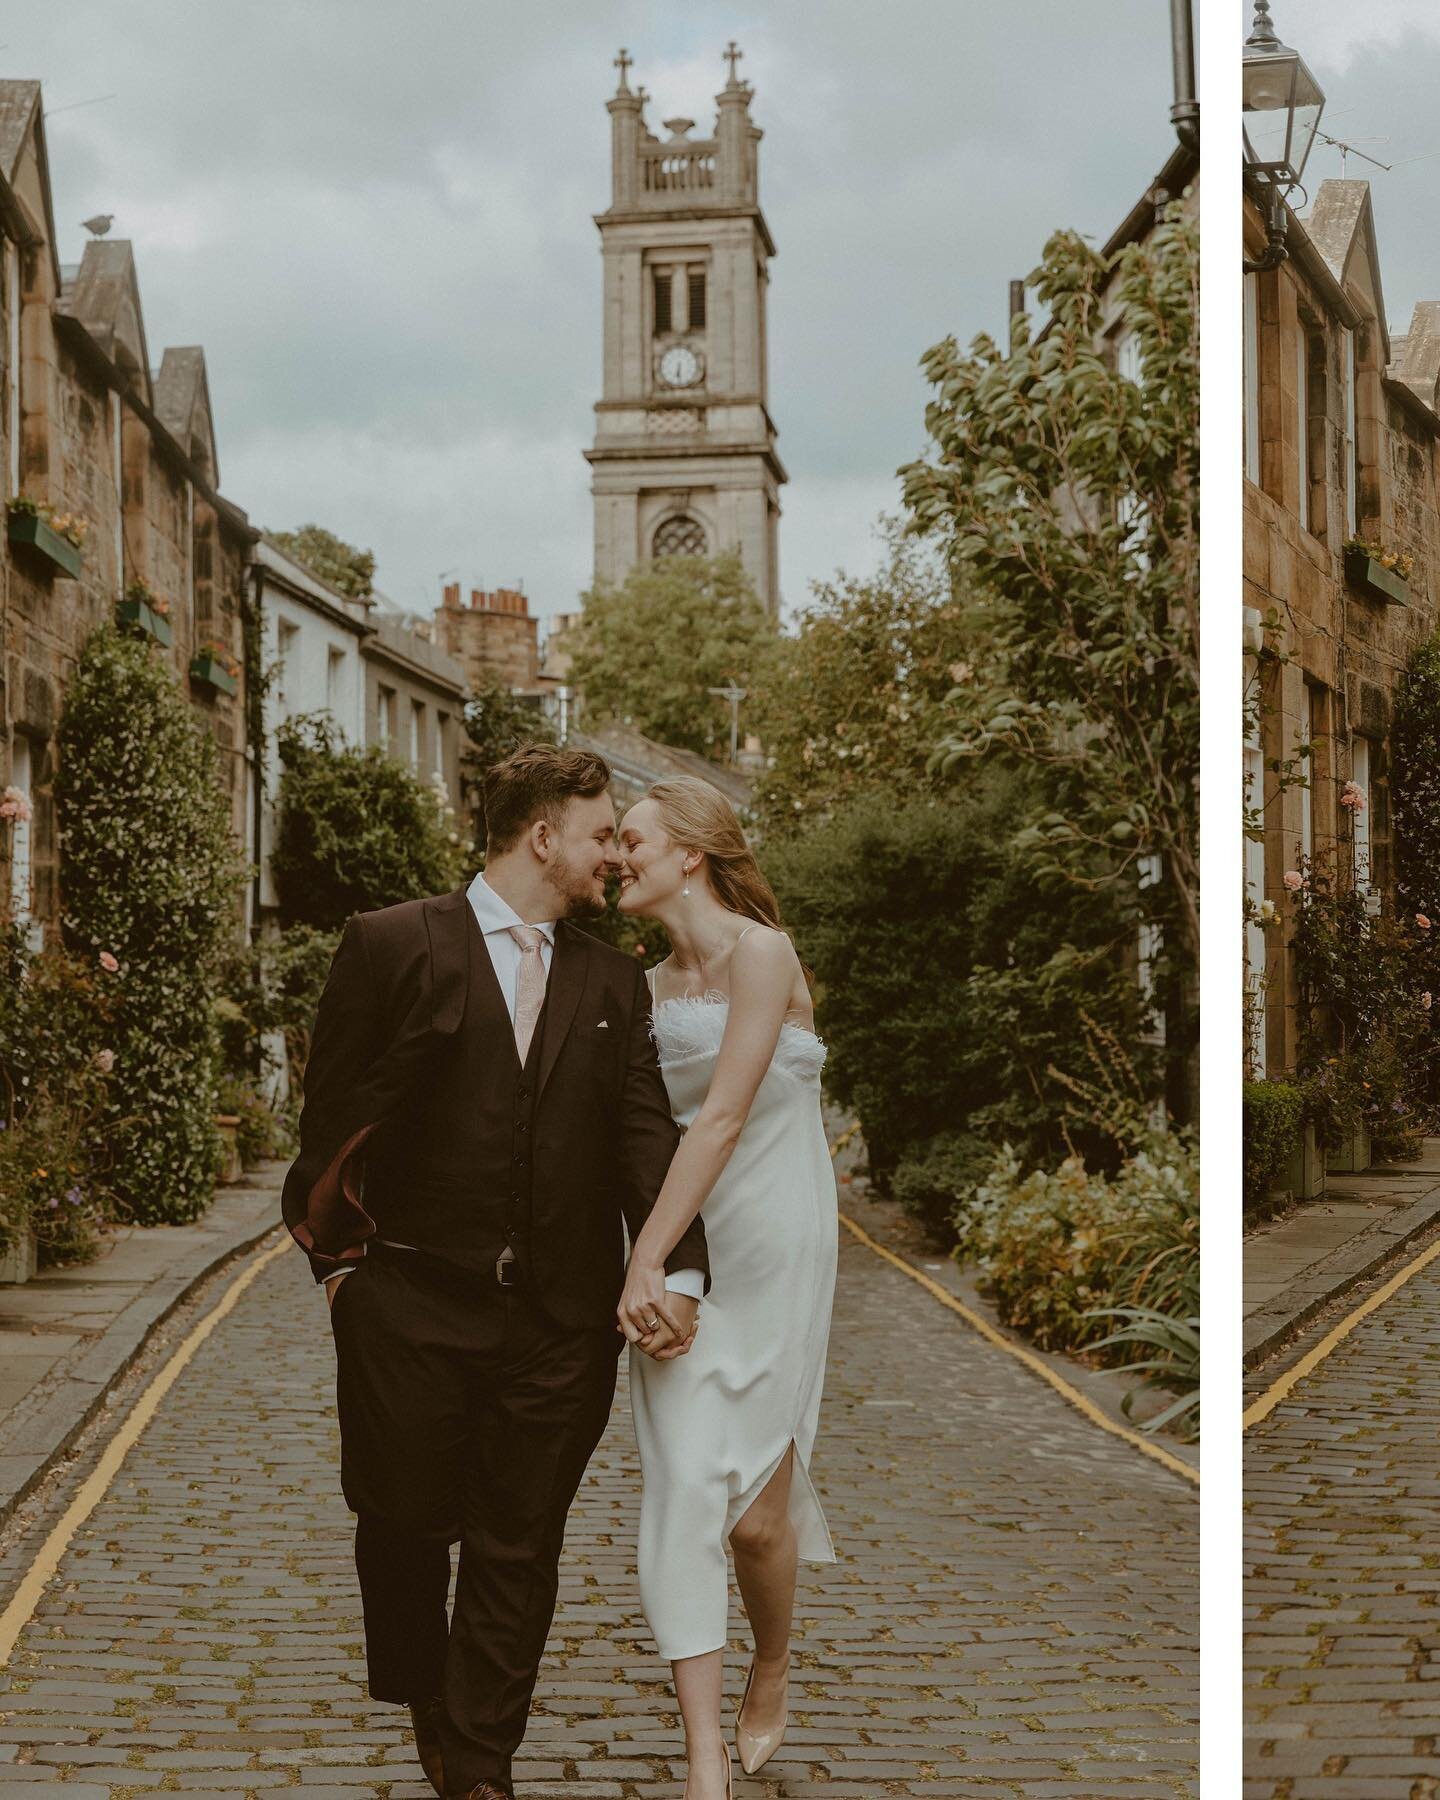 These two lovebirds are just the cutest and sweetest couple. Loved meeting you two and exploring the city a little with y&rsquo;all! 😍

Couple: @rebecca_wyman &amp; Patrick
MUA: @muadnesss 
Dress: @bhldn 
:
:
:
:
:
:
:
:
#edinburghengagement
#scotla